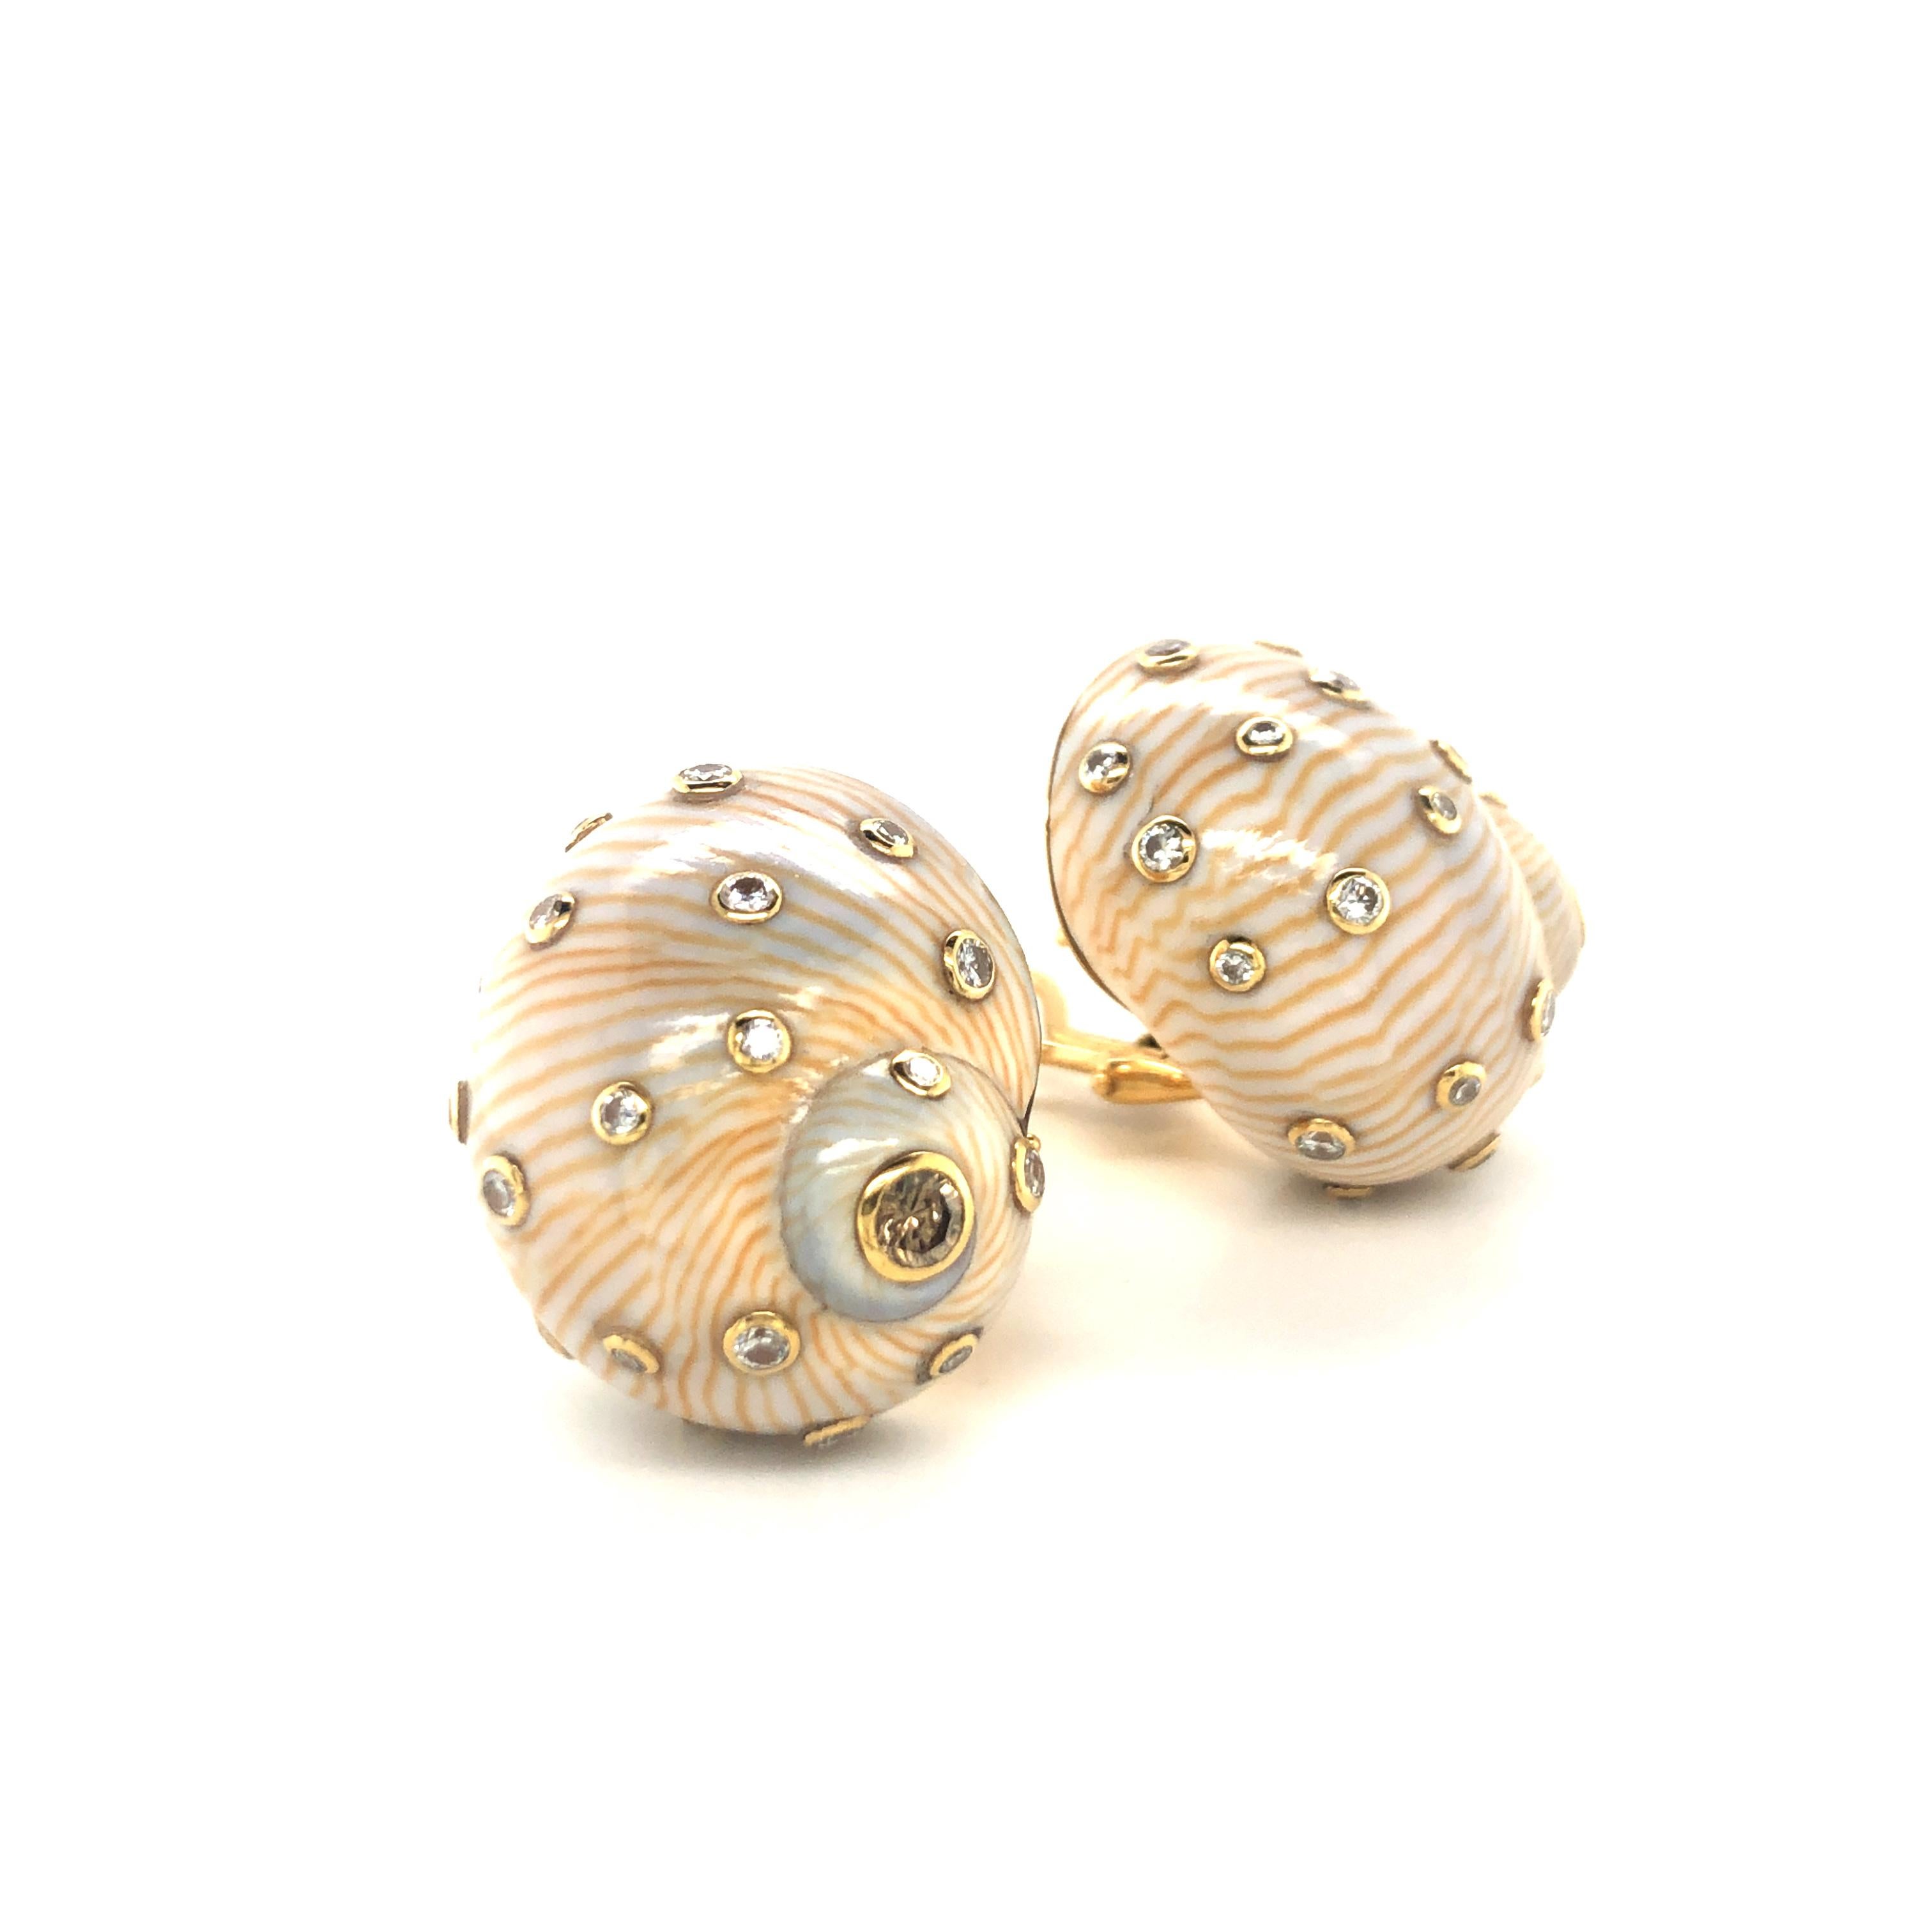 Summer is coming and here are the perfect earrings for the next beach party.
Crème coloured snail shell with fine brown lines highlighted with brown and white diamonds bezel set in 18 karat yellow gold. 
The 40 diamonds have a total weight of 1.16